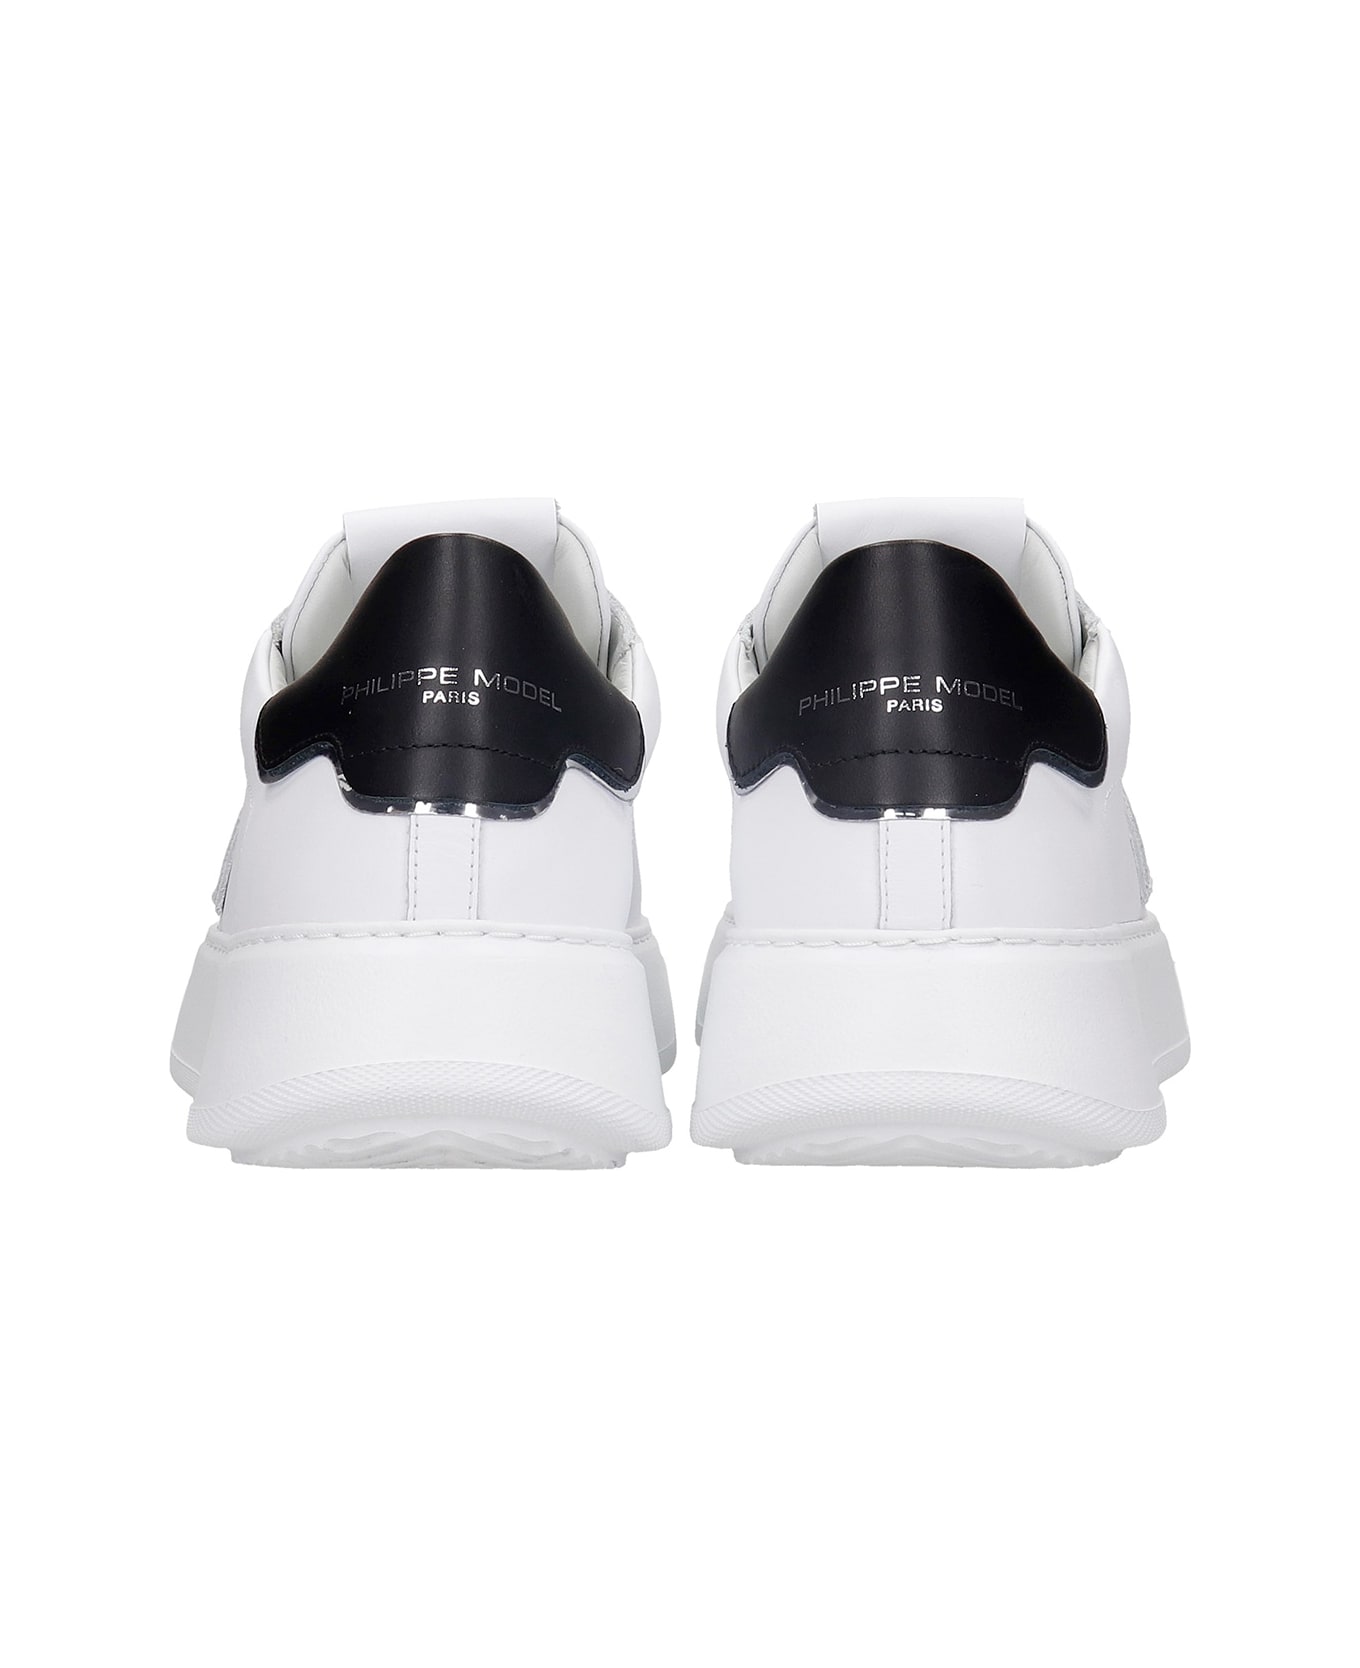 Philippe Model Temple Sneakers In White Leather - Veau Blanc Noir スニーカー